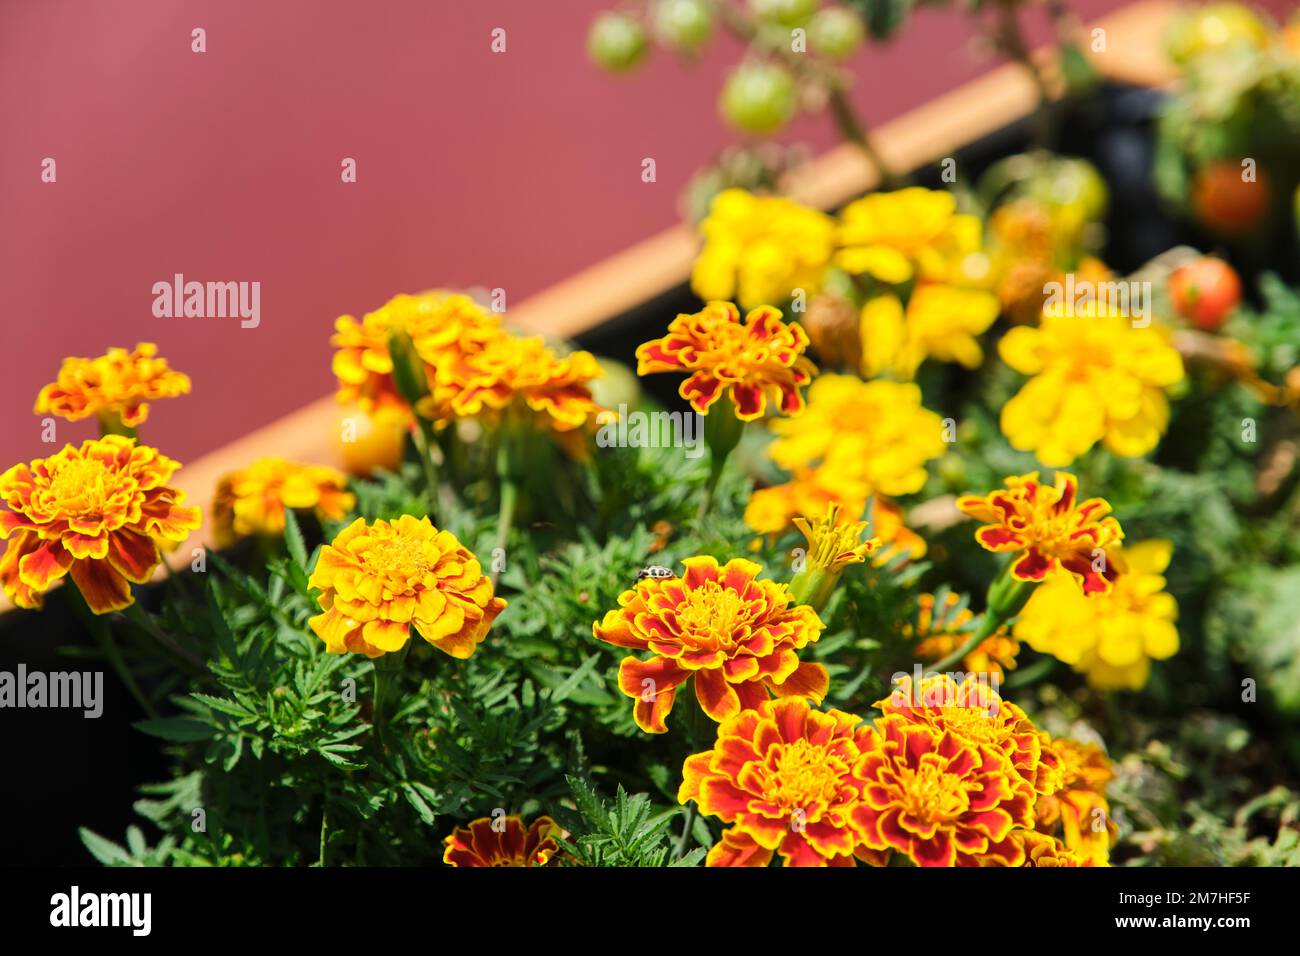 Vegetables and aromatic plants growing in a urban community garden located on the rooftop of a building. Concepts of sustainable agriculture, ecology Stock Photo